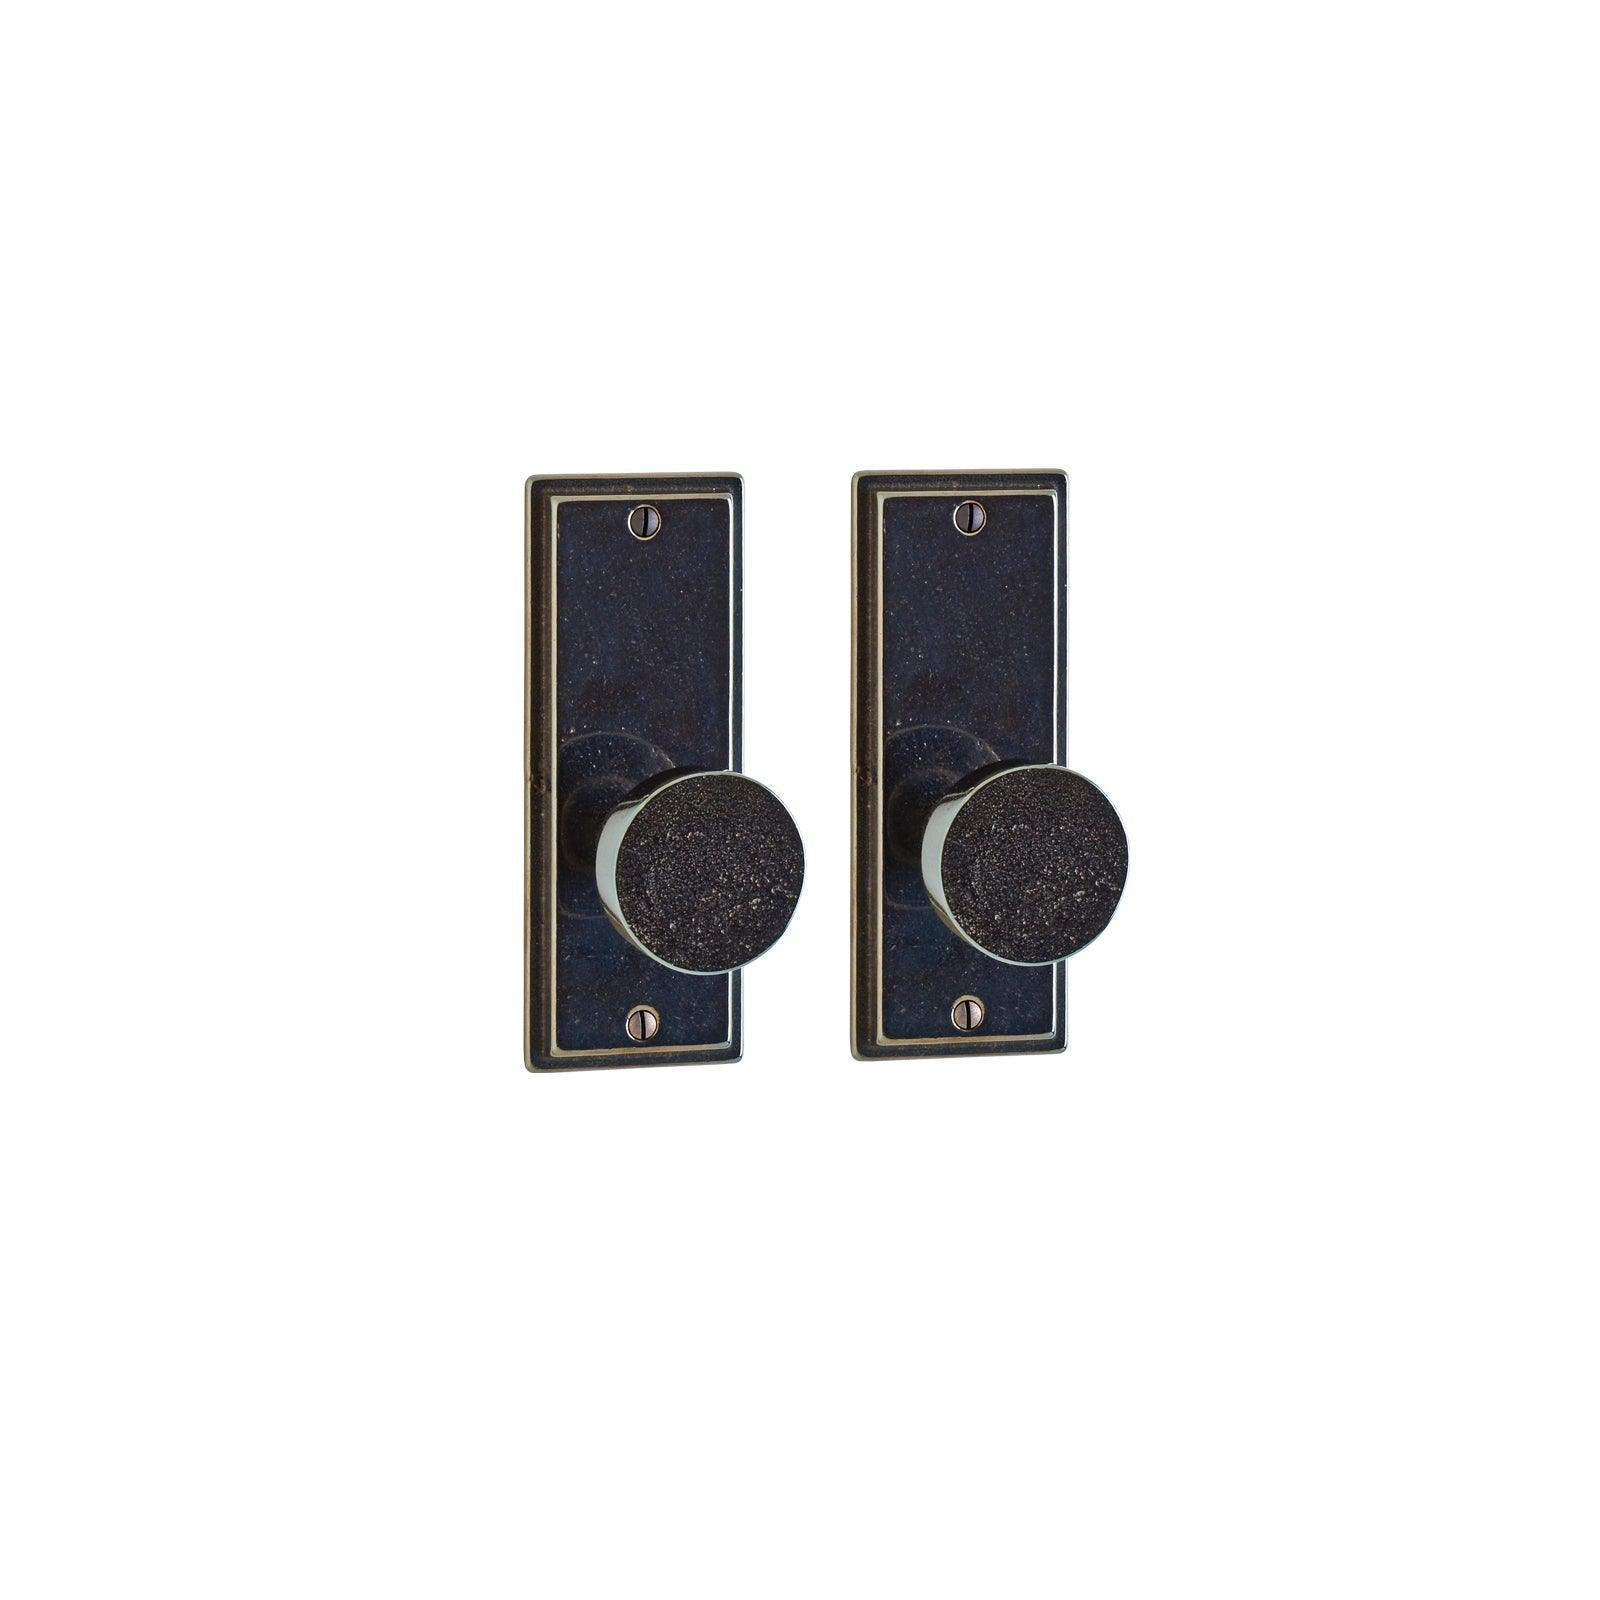 Stepped Builder Series 2 1/2" x 6 1/2" EB45 Passage Mortise Lock - Discount Rocky Mountain Hardware